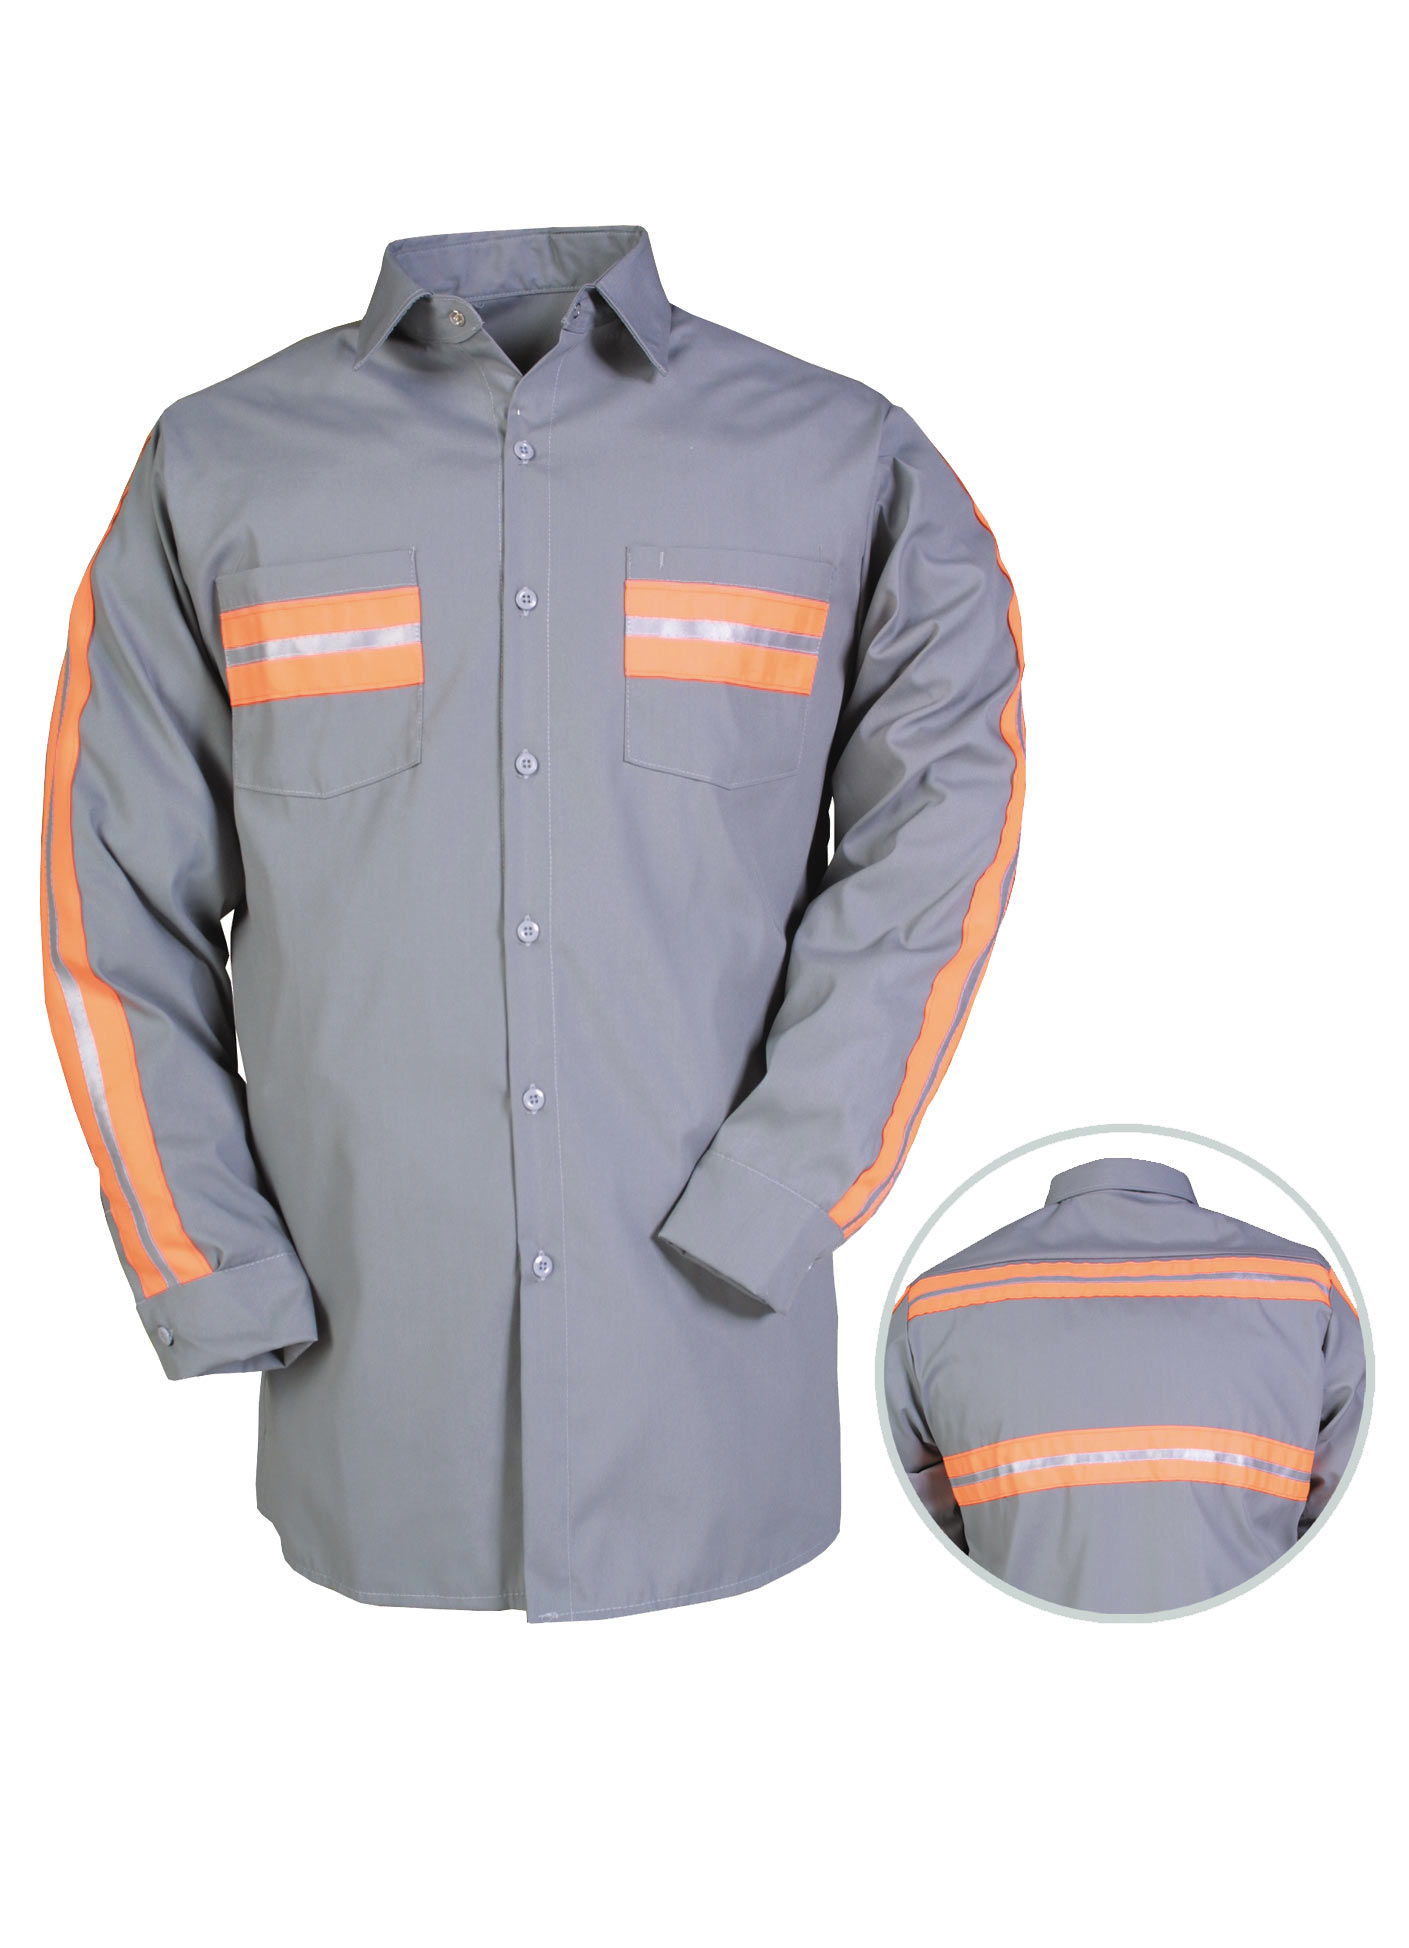 Big Bill Long Sleeve Work Shirt With Reflective Tape - 102BF